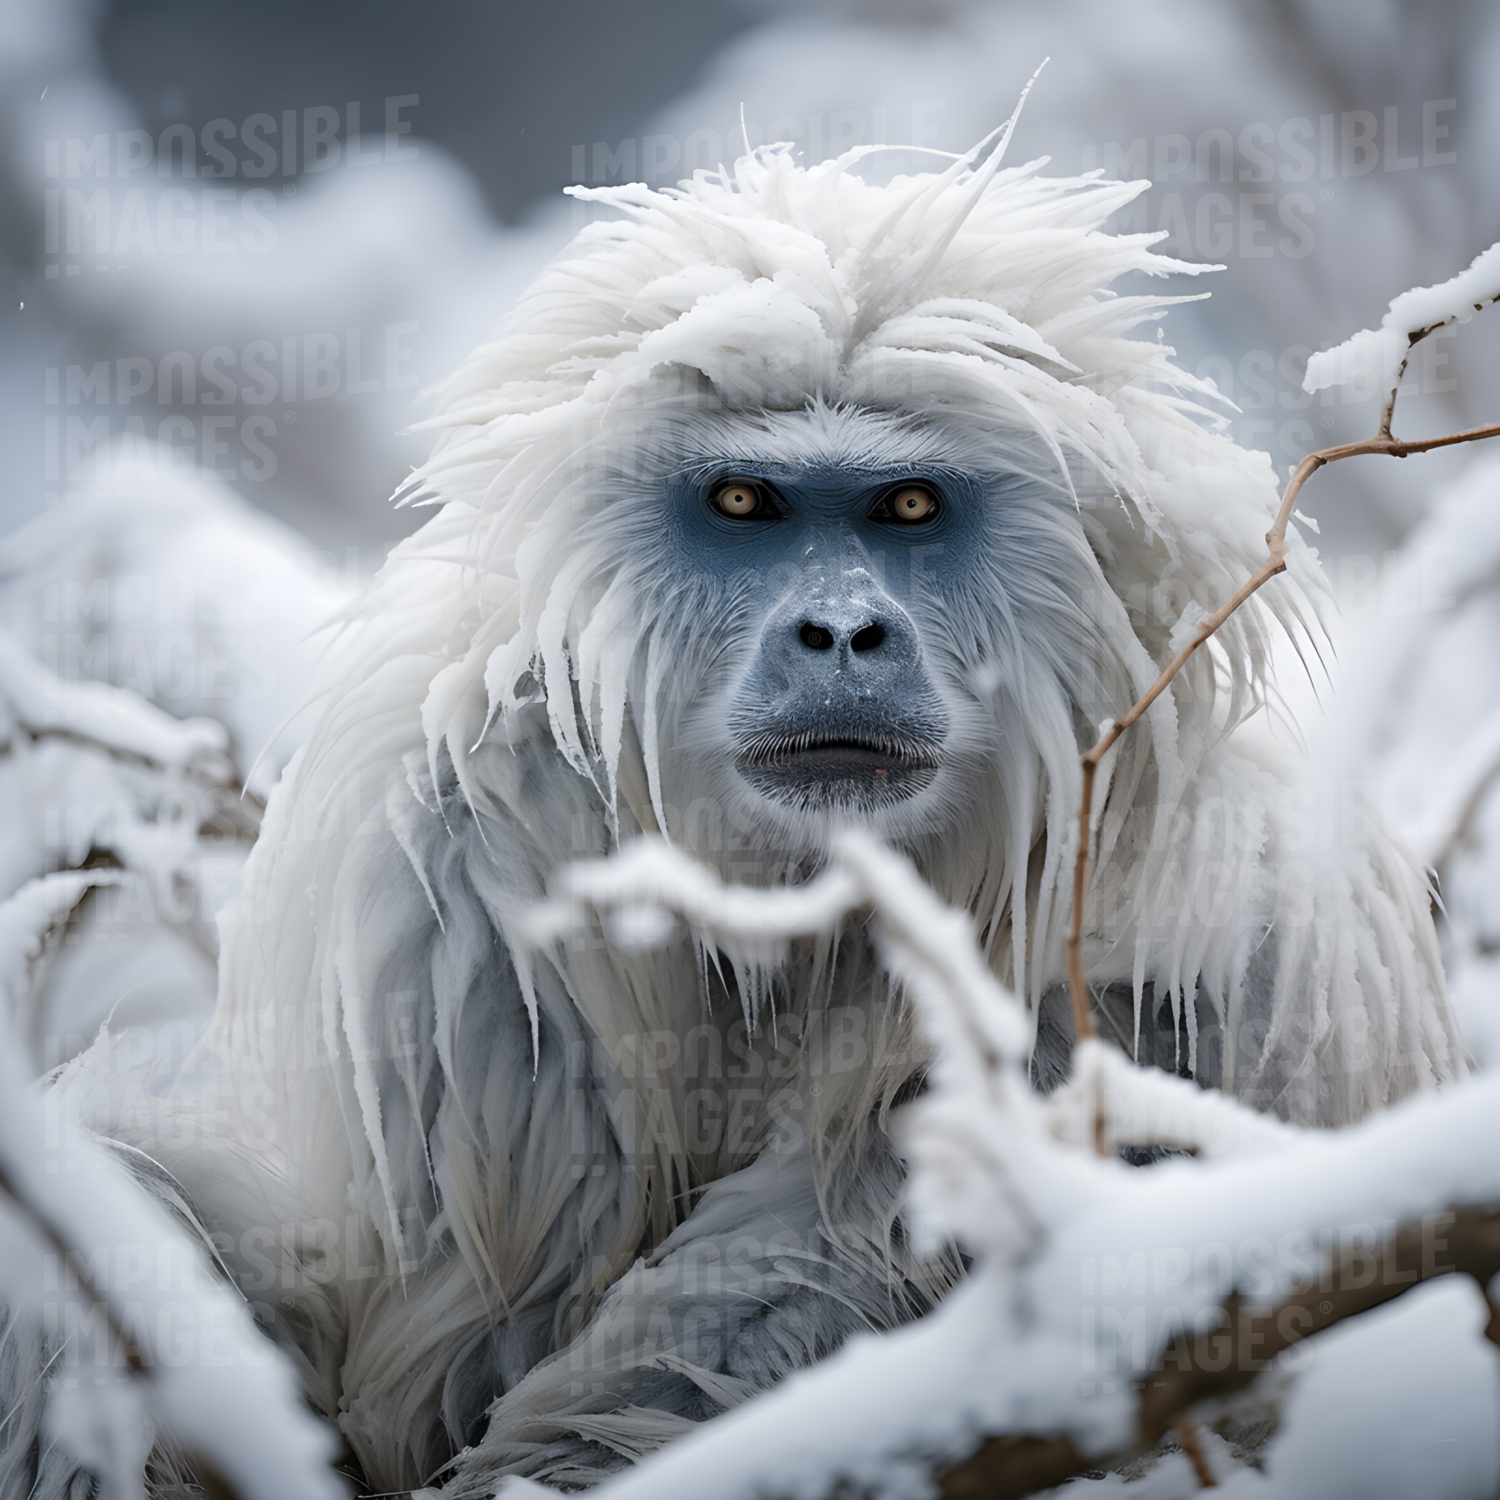 Curious yeti with a blue monkey-like face and frost-matted fur